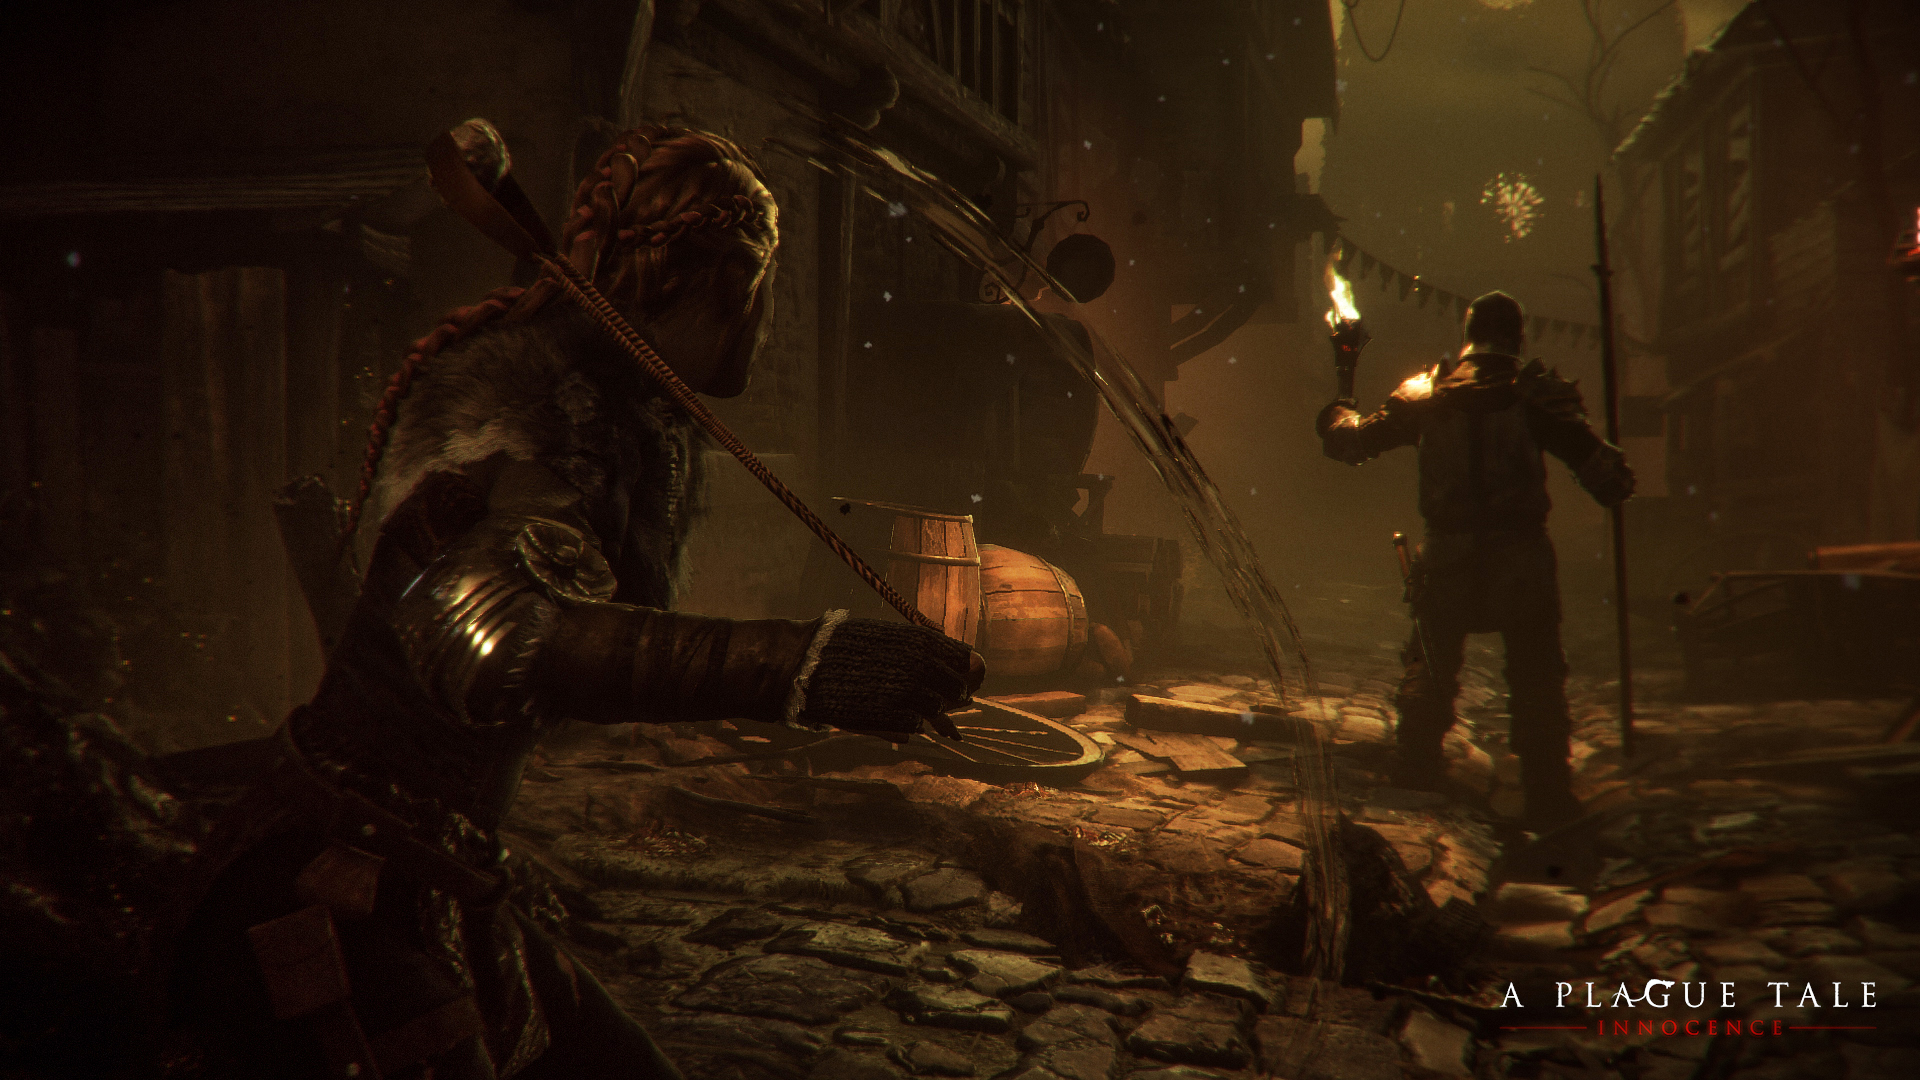 Last Image from Image from A Plague Tale: Innocence